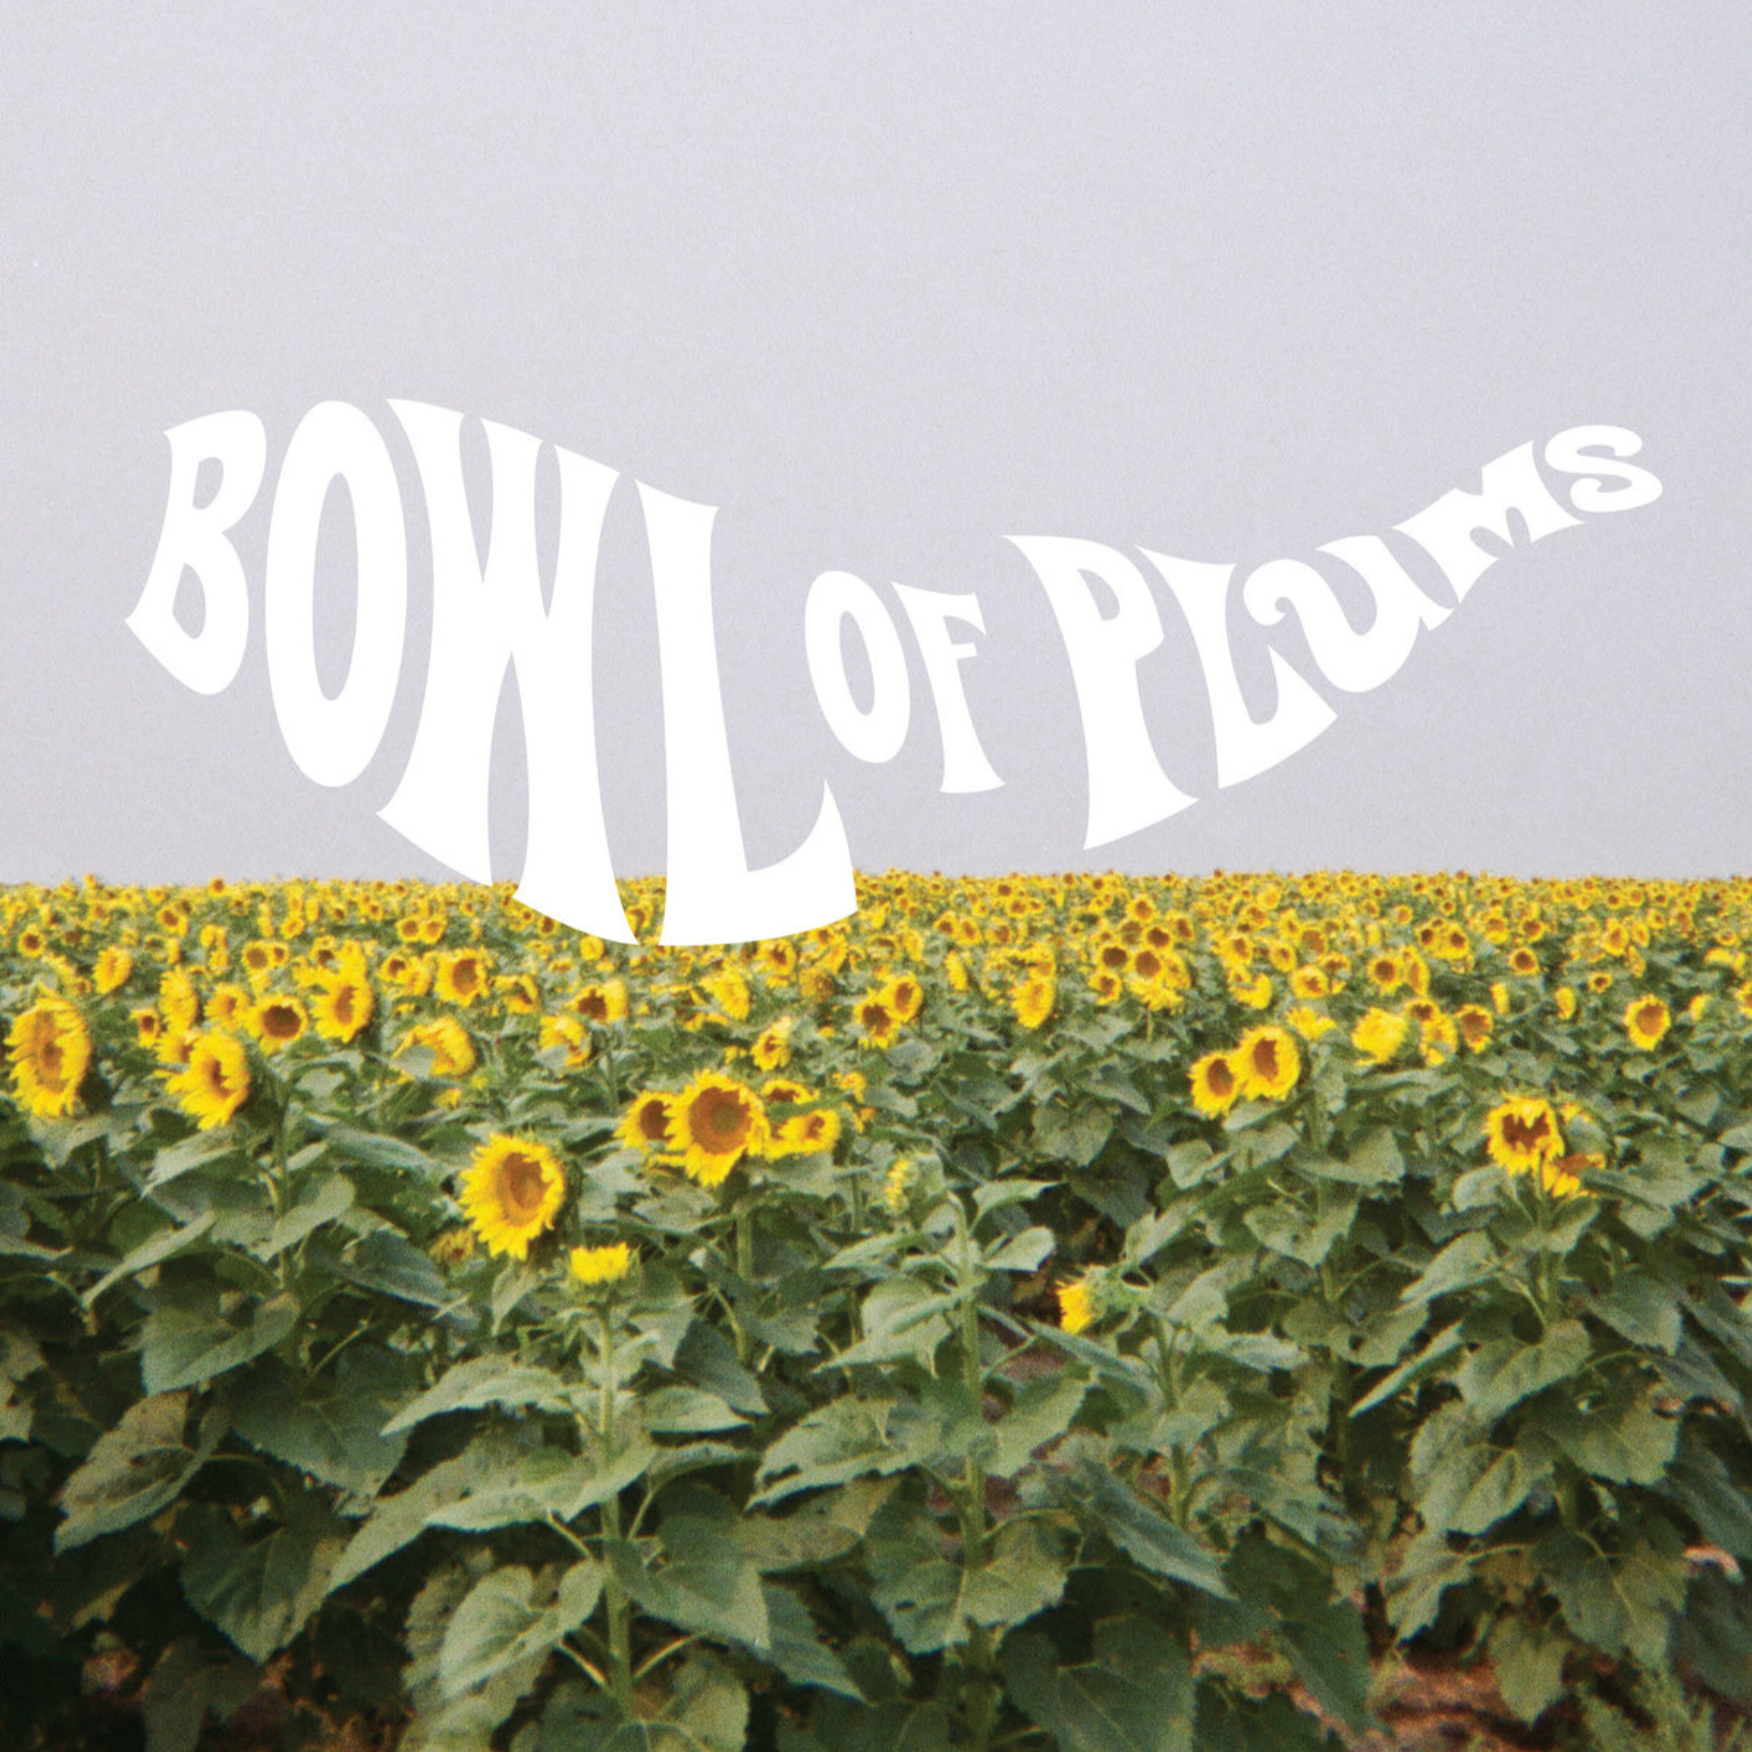 An album cover featuring a field of sunflowers with the text BOWL OF PLUMS on top of it